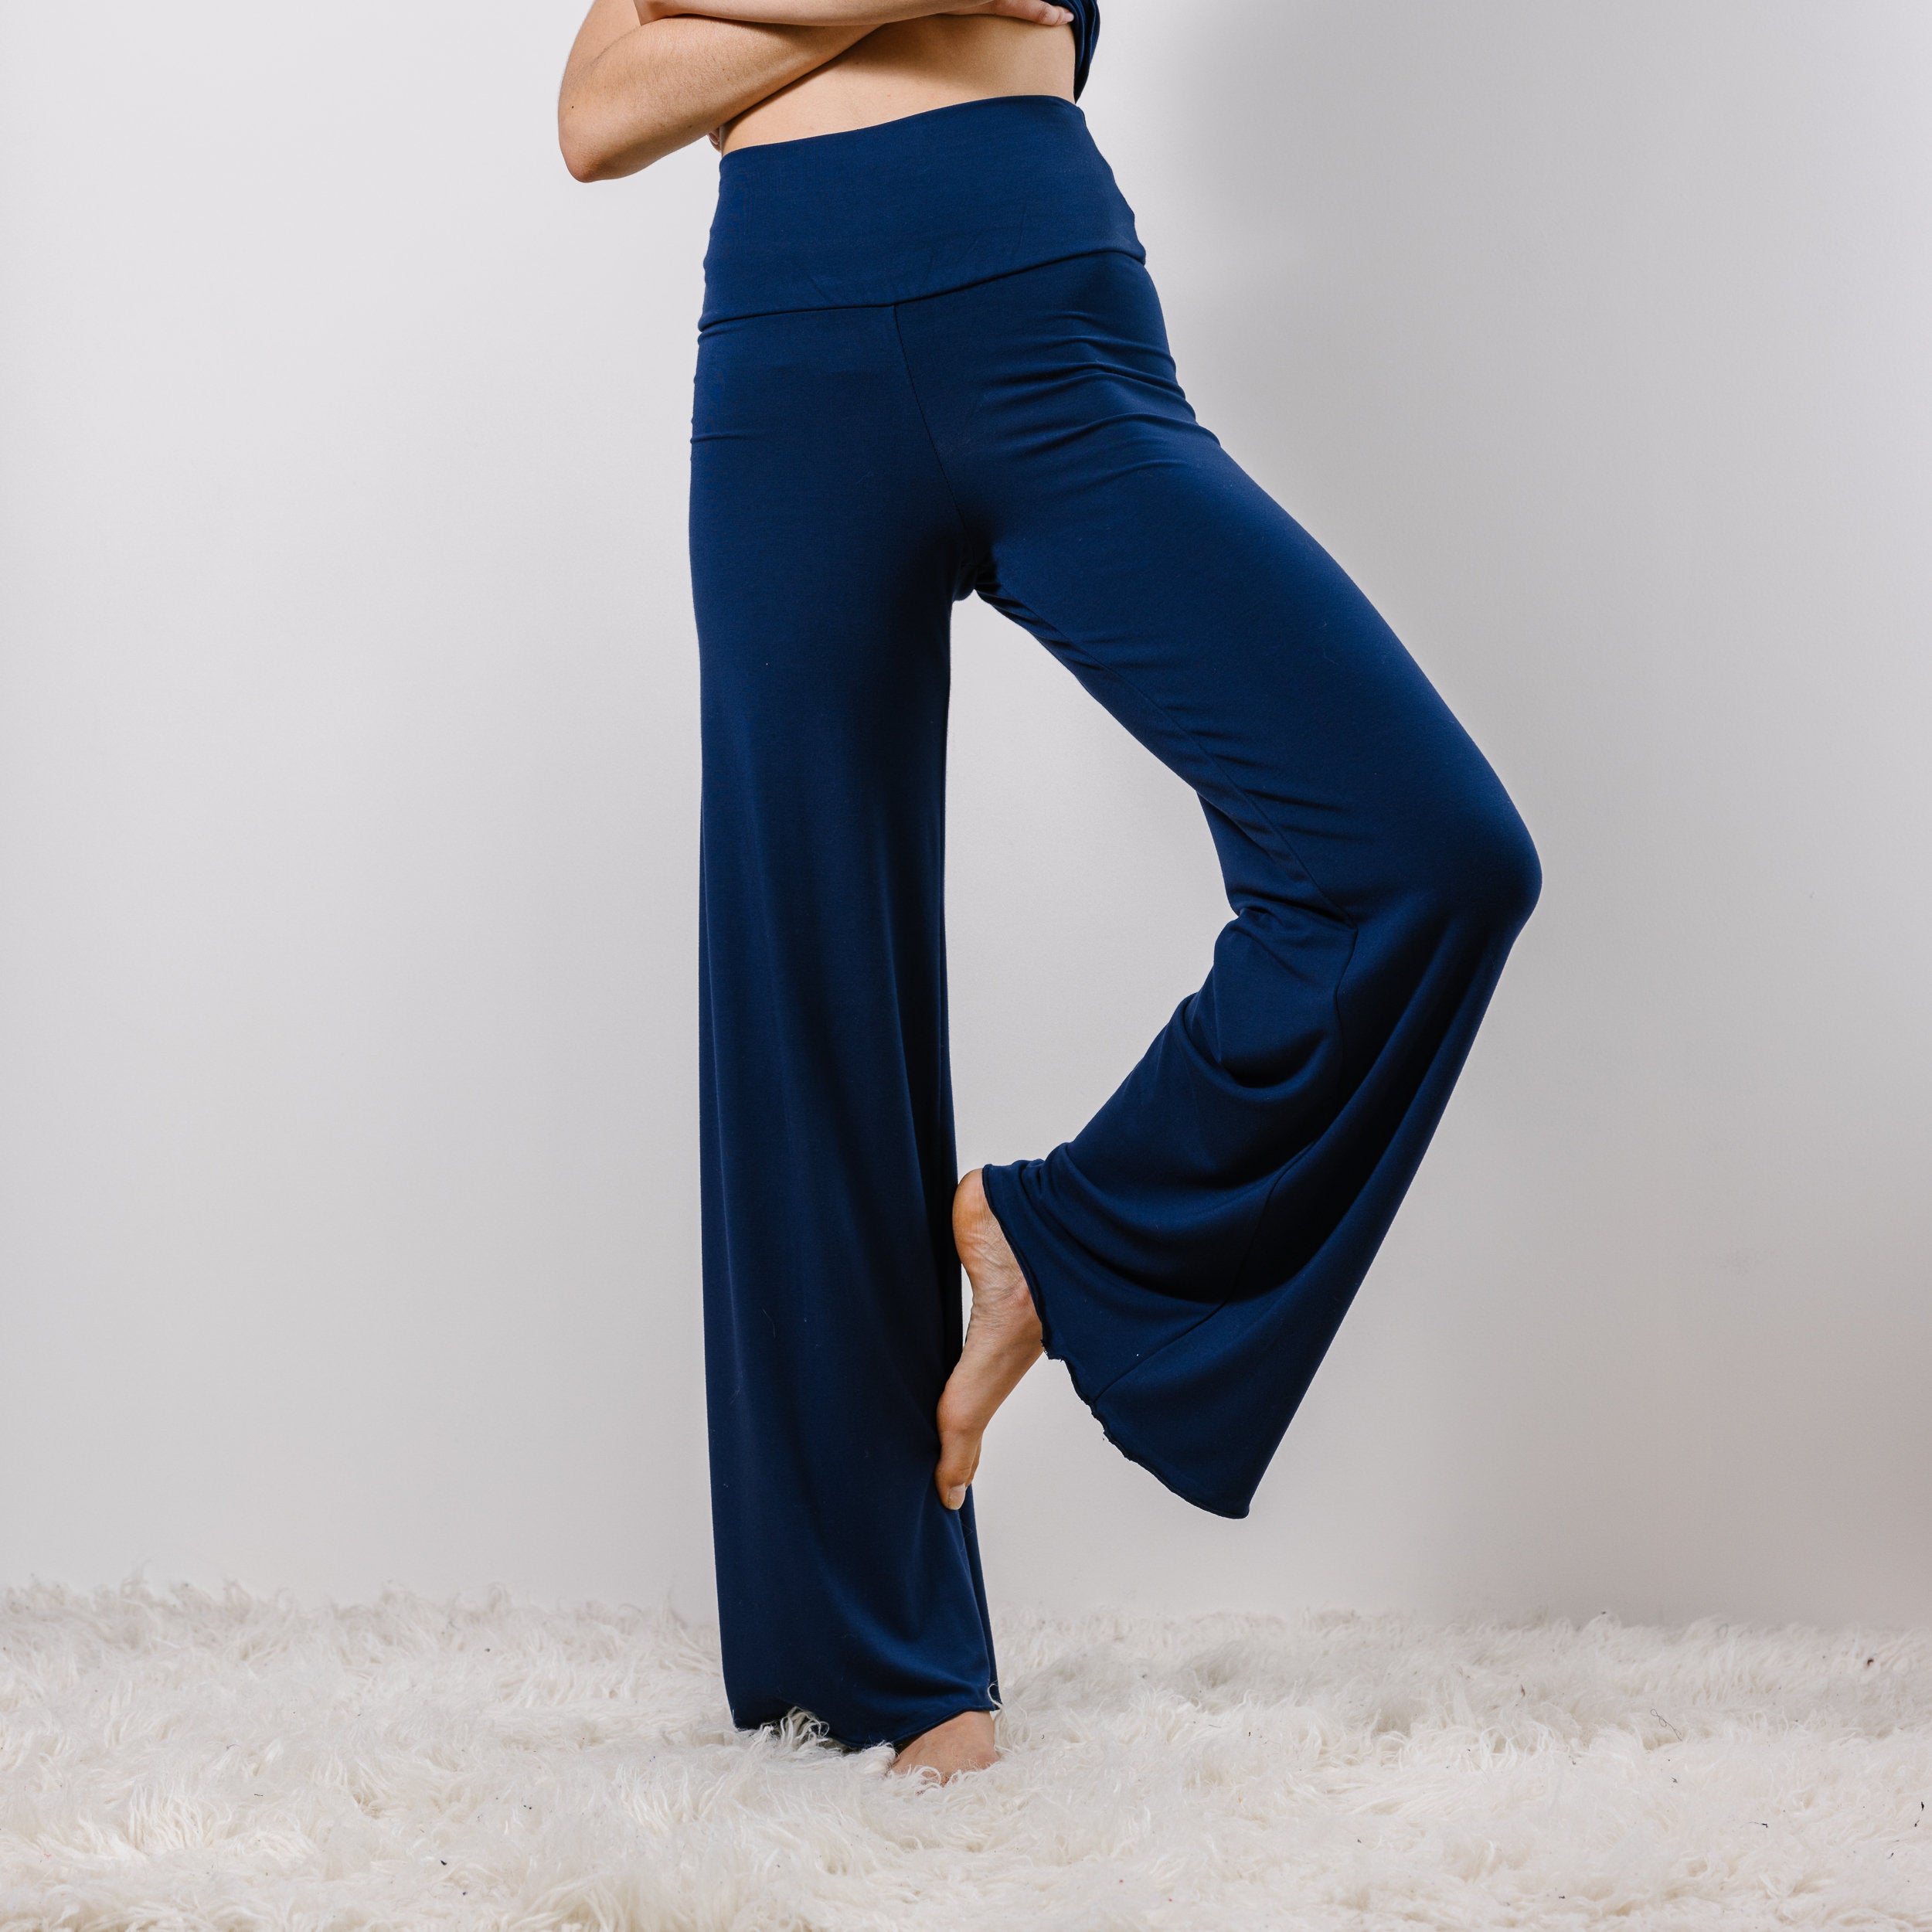 Wide Leg Lounge Pants for Women Lightweight High Waisted Adjustable Tie  Knot Loose Trousers with Pockets - Walmart.com